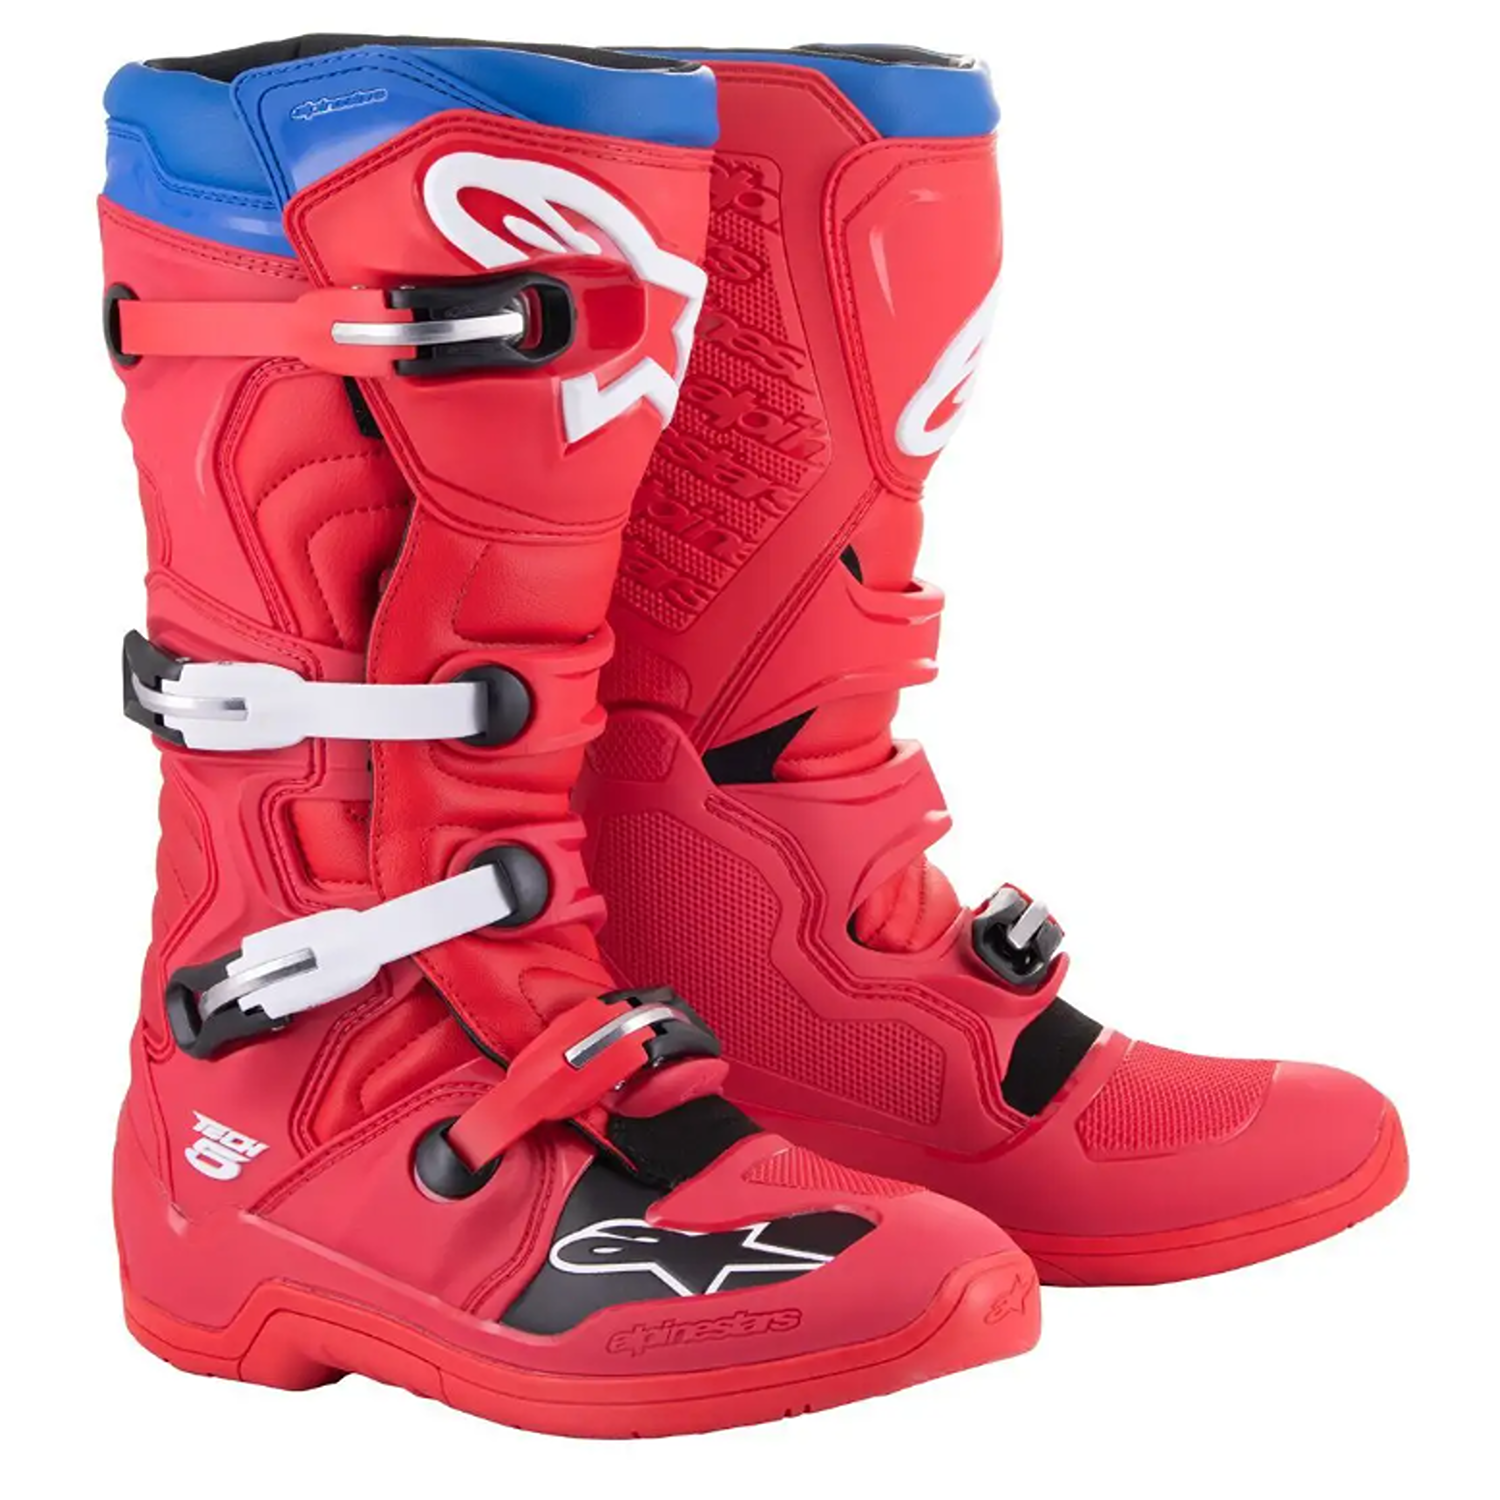 Image of Alpinestars Tech 5 Boots Bright Red Dark Red Blue Size US 6 ID 8059347199313